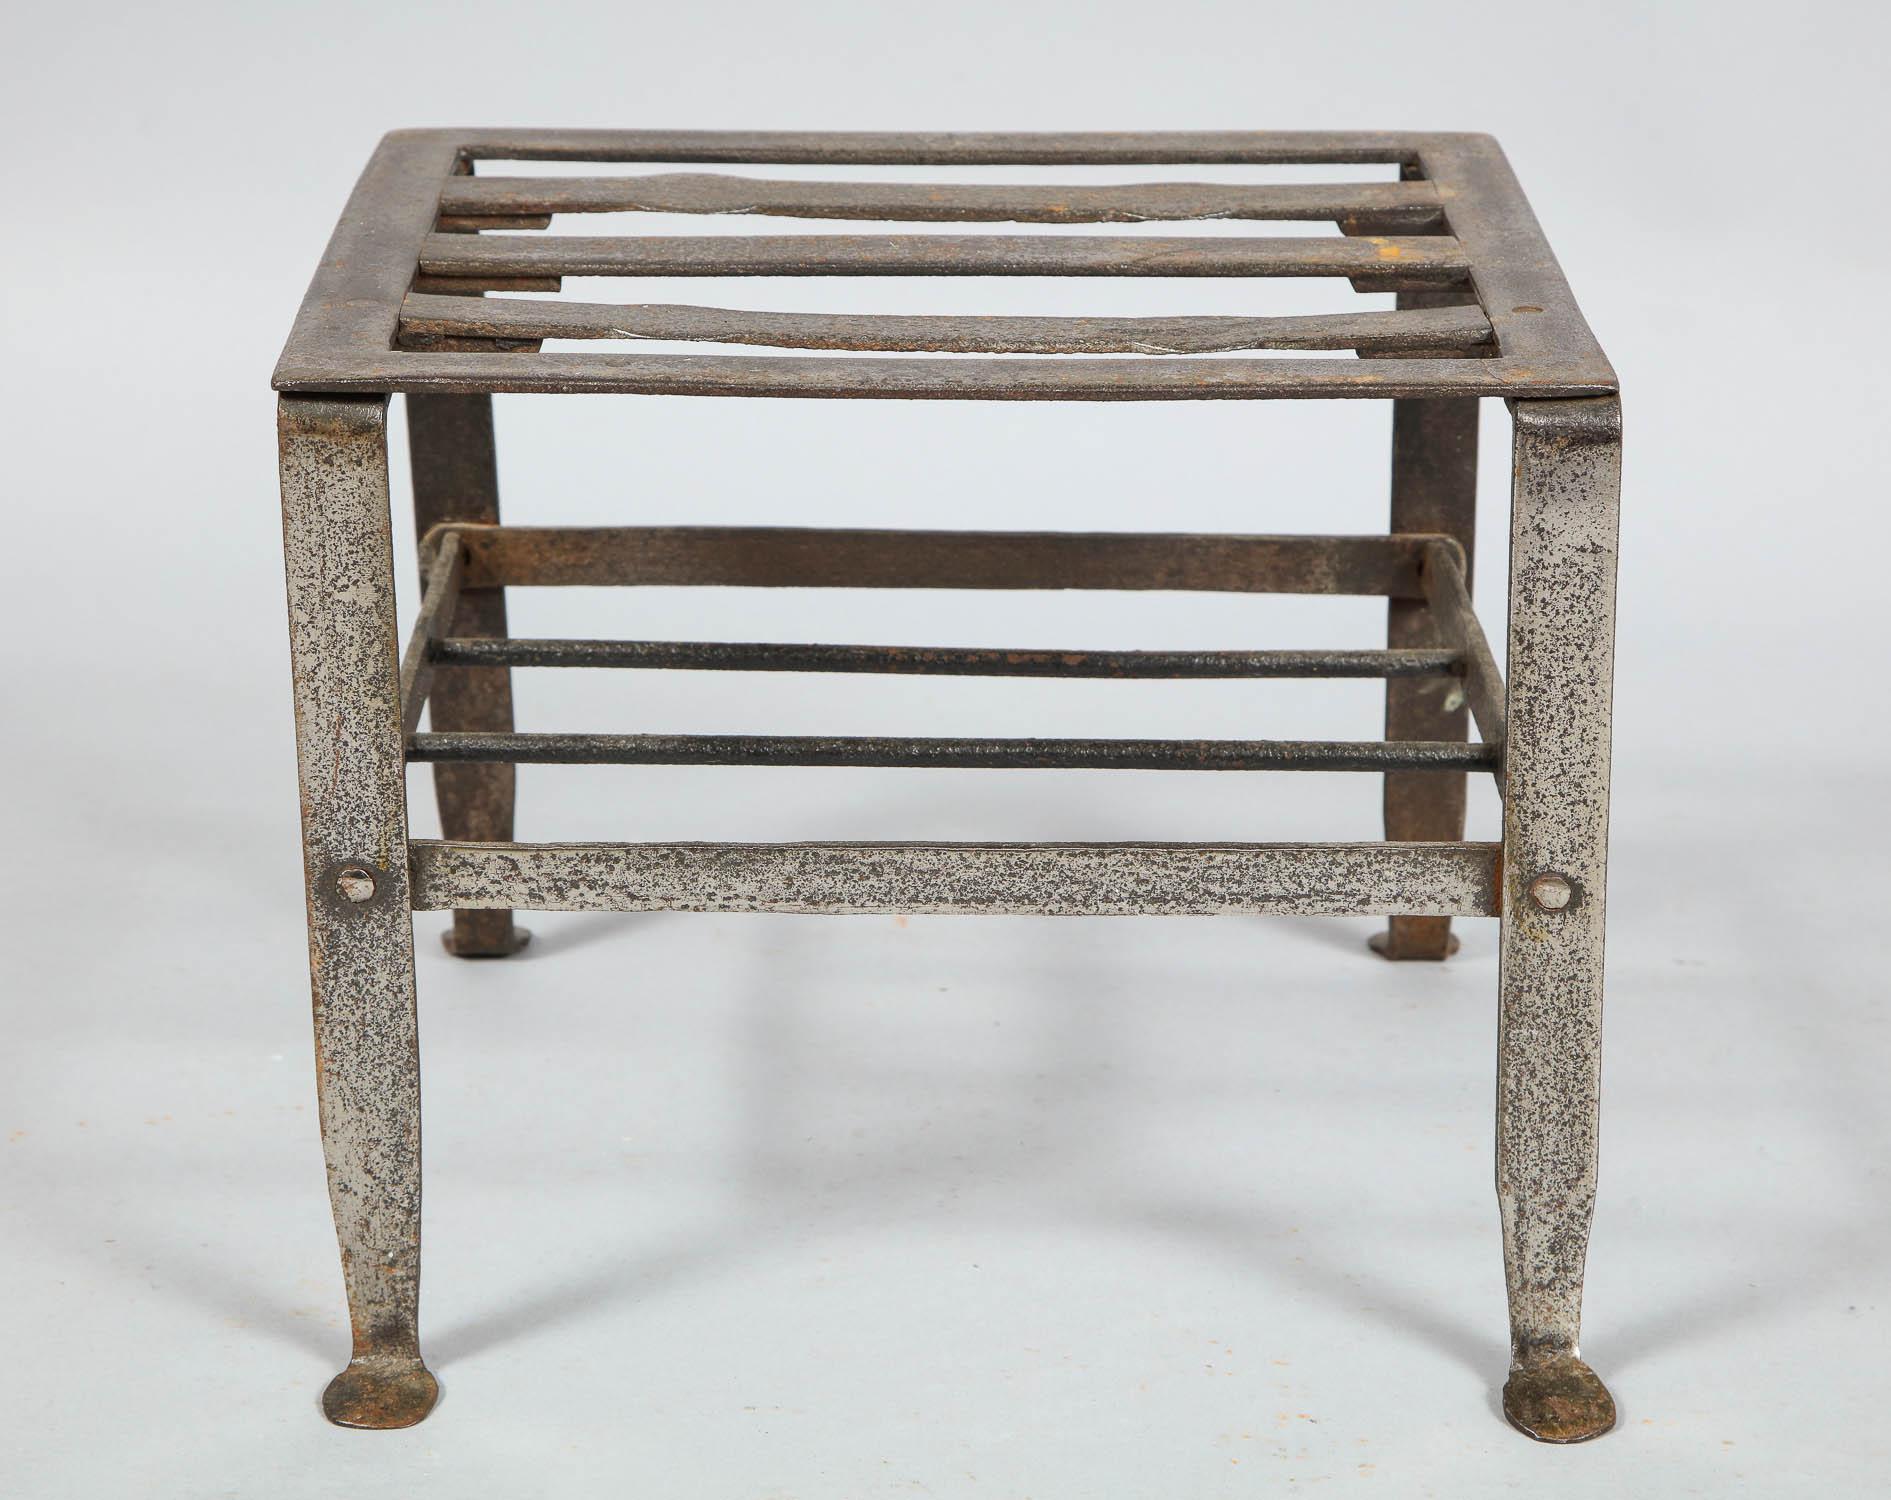 Good early 19th century steel footman or trivet, having a slatted top over four flattened legs joined by peened stretchers and ending in penny feet, the whole with nicely pitted and burnished surface, great as a side table next to a club chair.